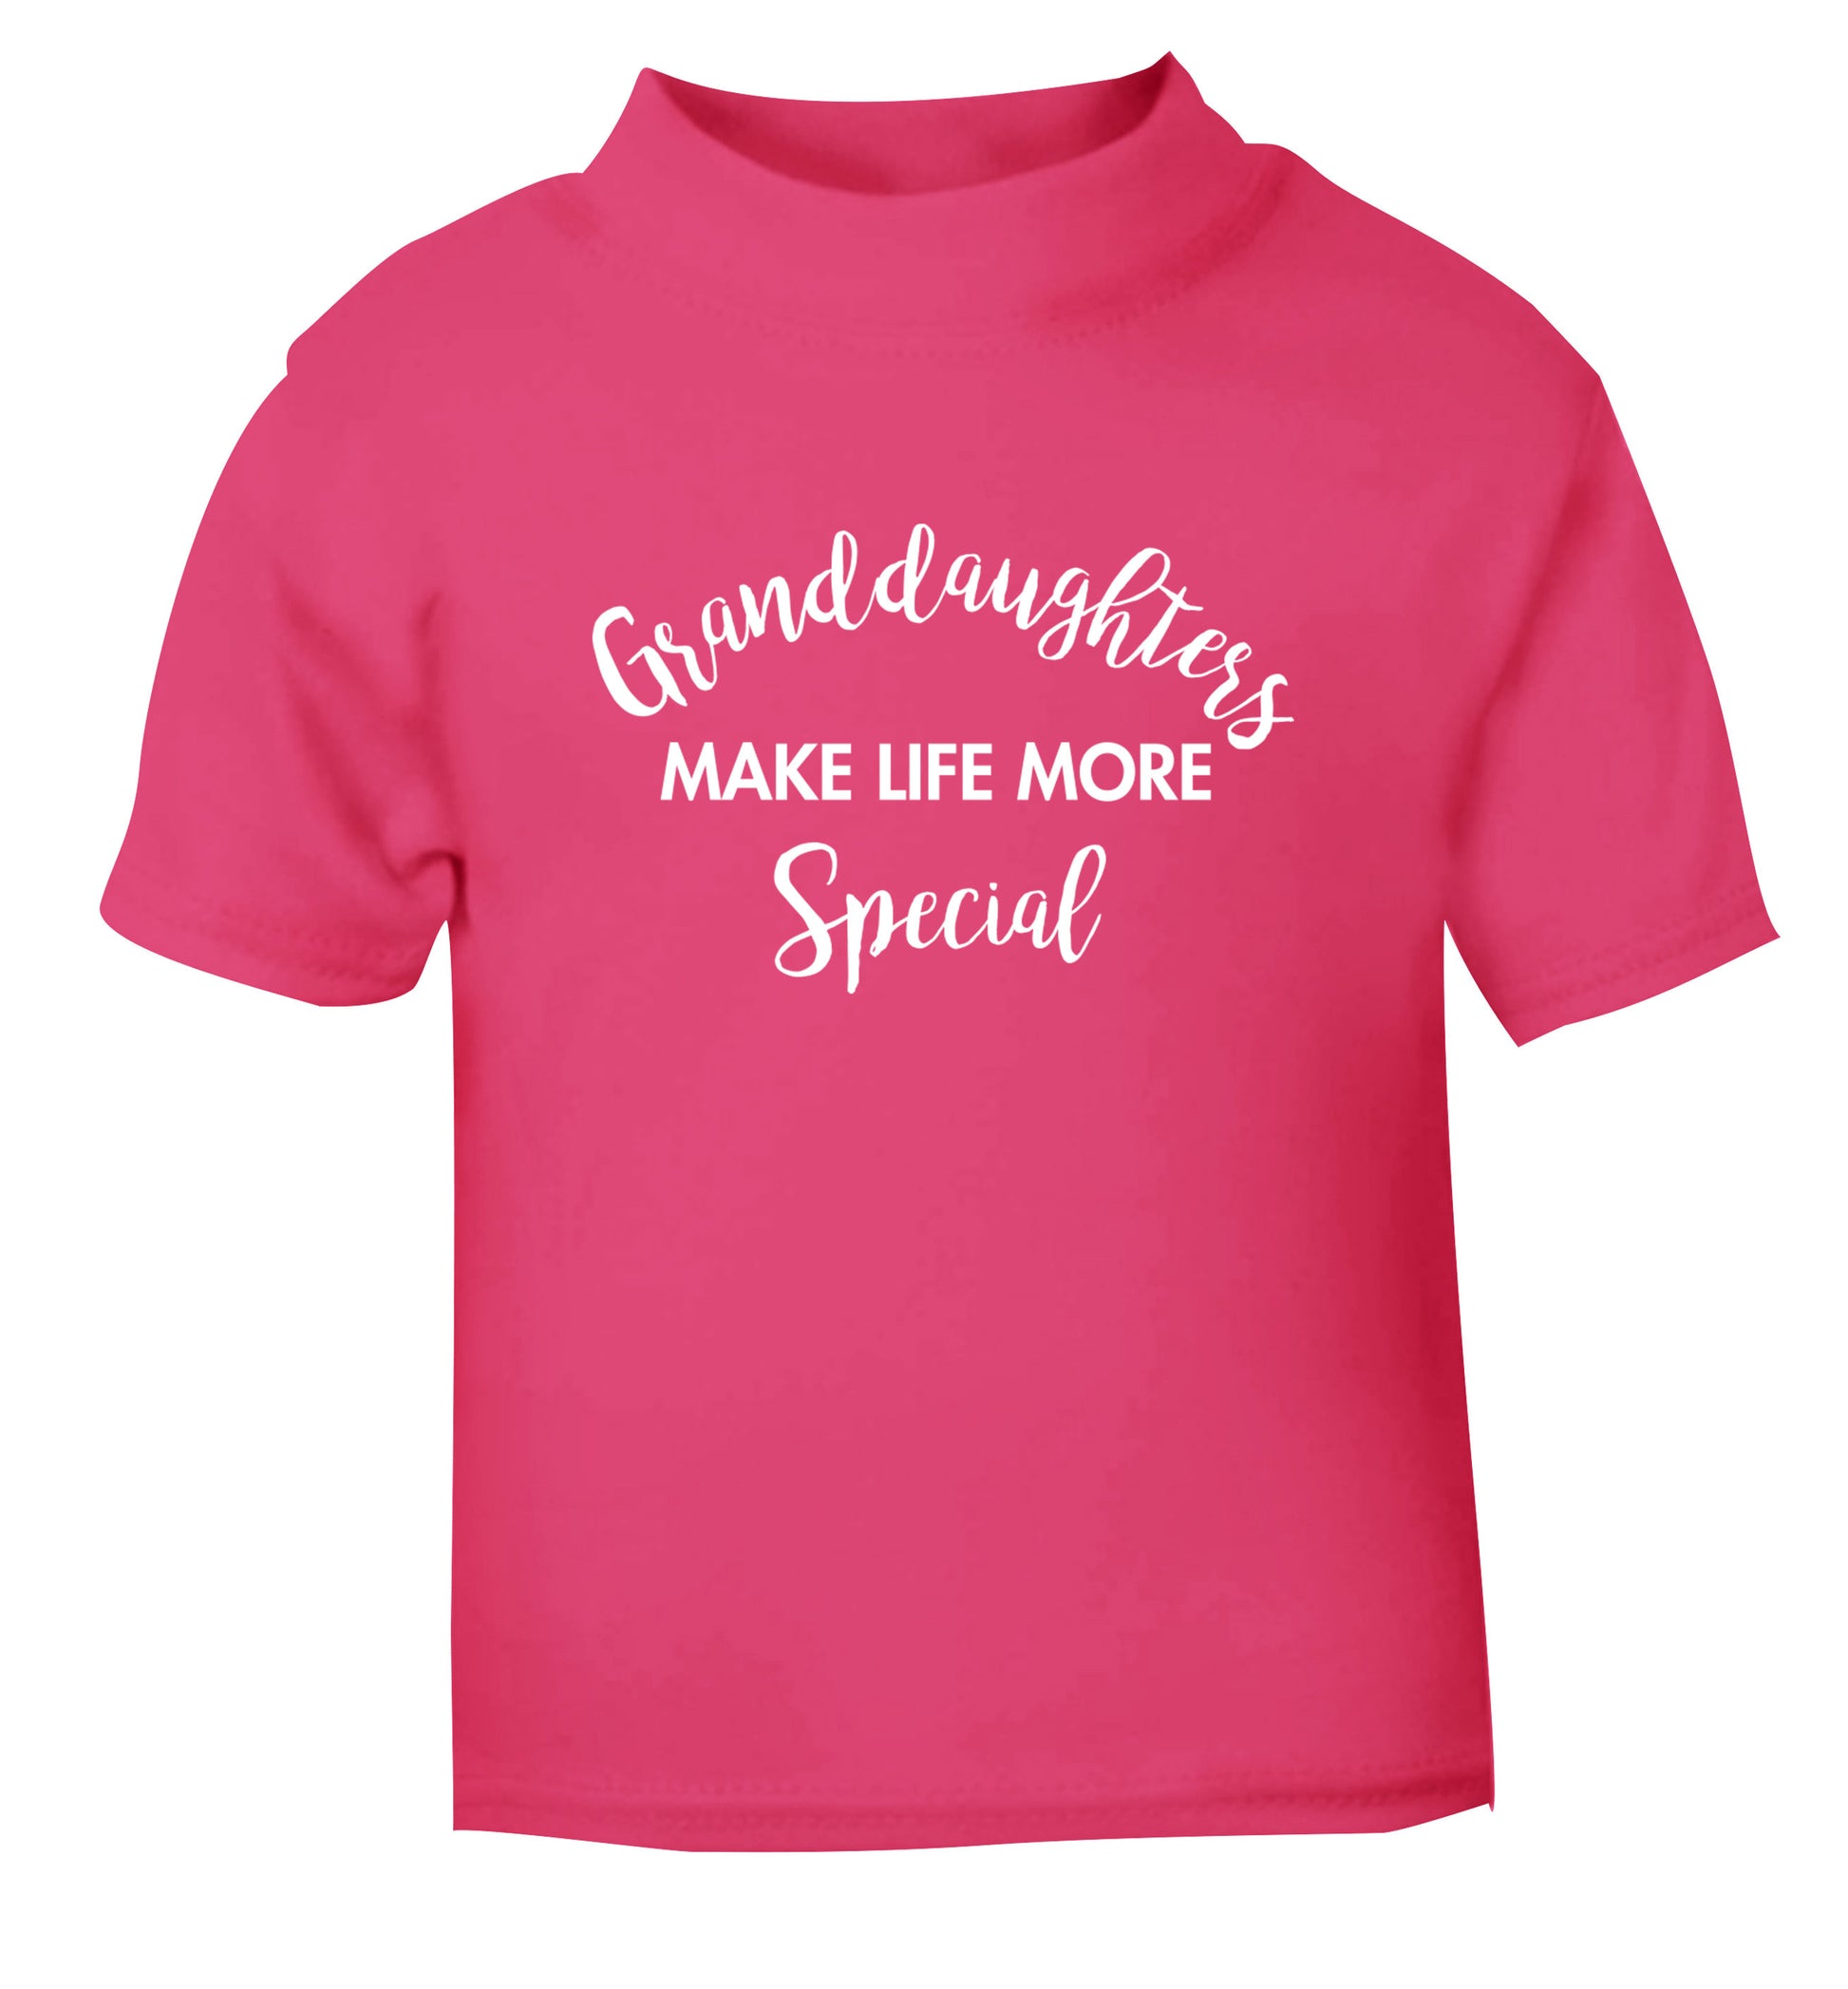 Granddaughters make life more special pink Baby Toddler Tshirt 2 Years